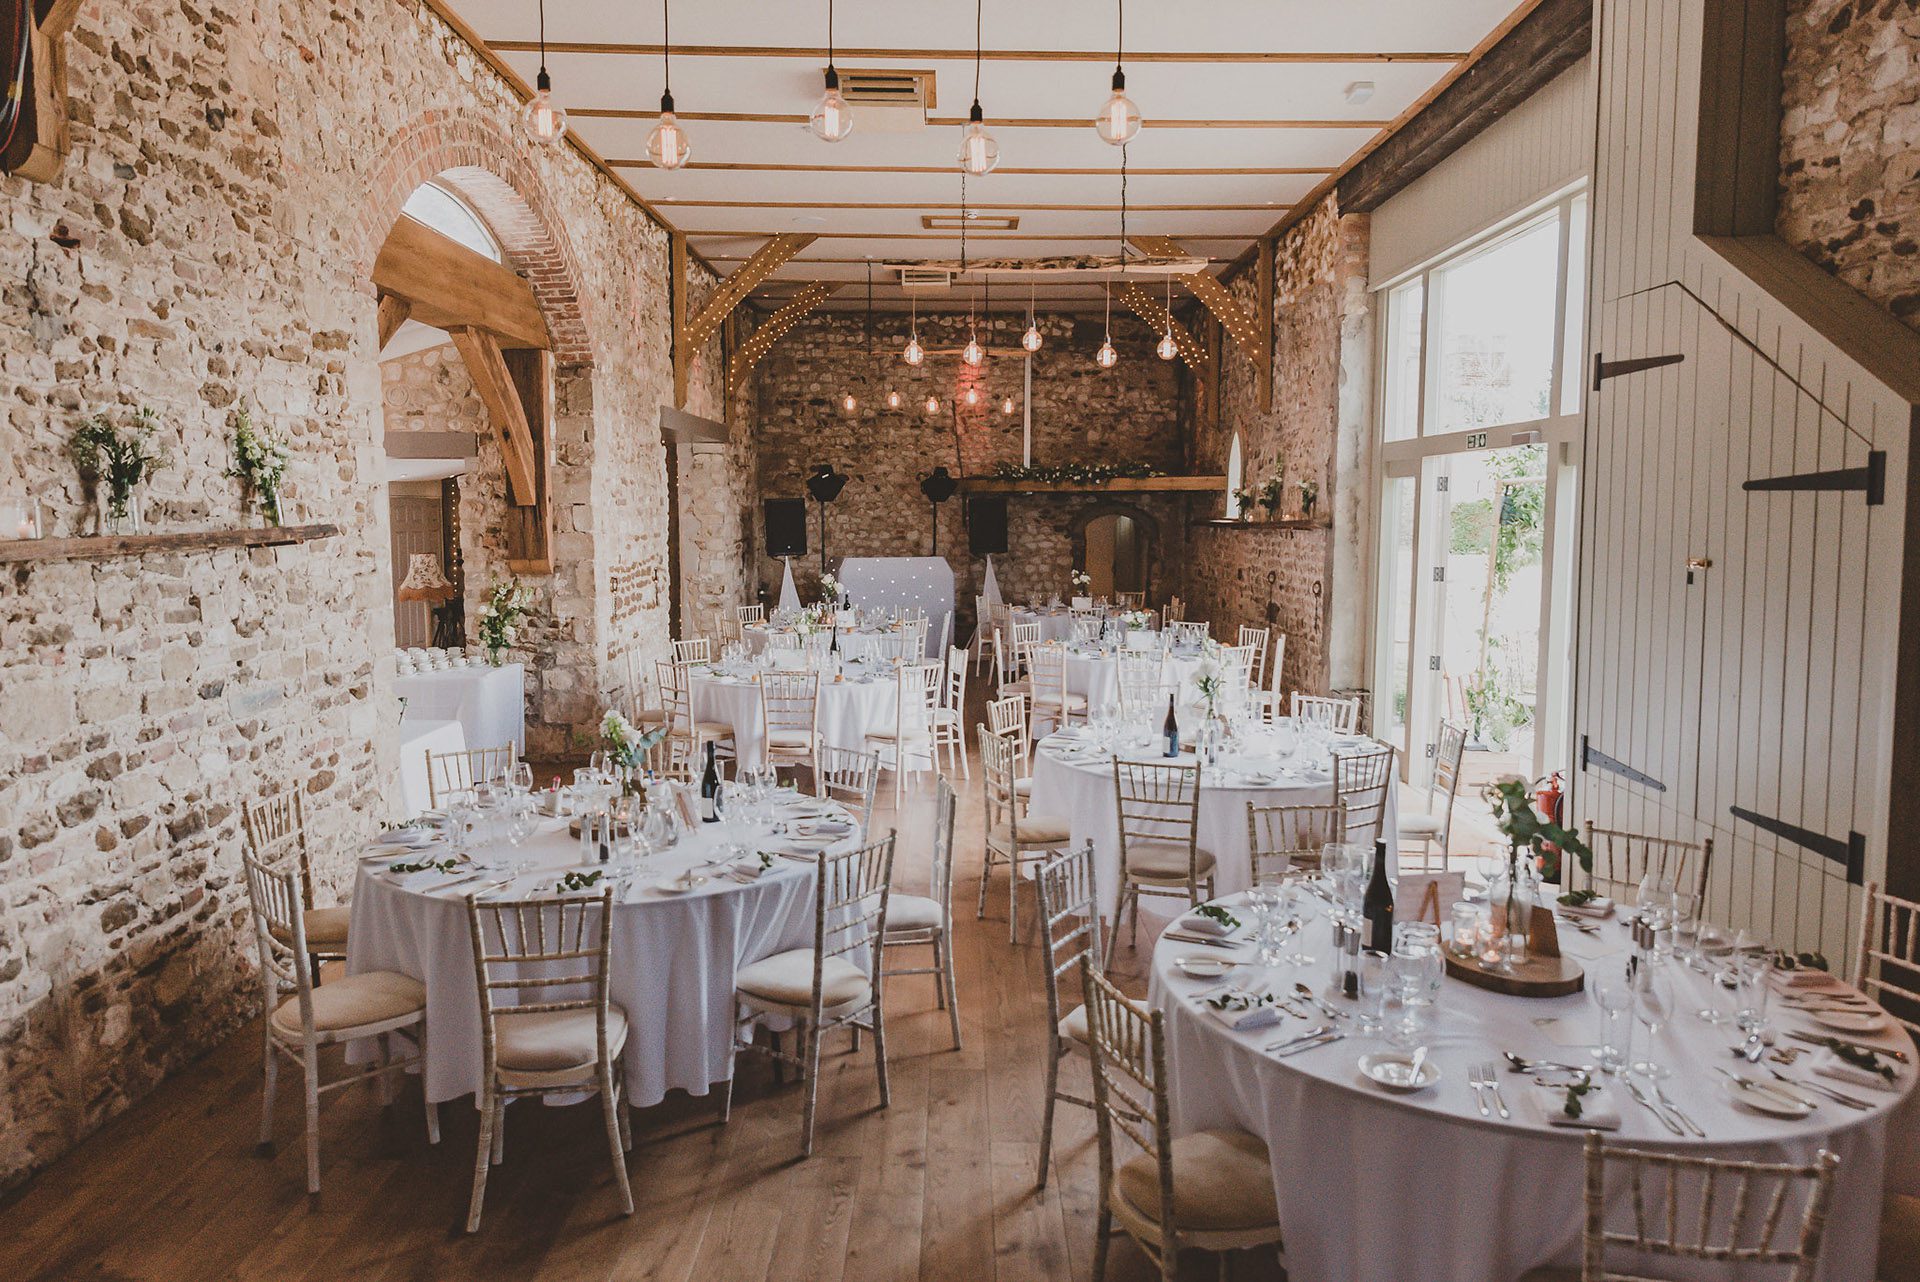 The barn at Pentney Abbey is set up for the wedding breakfast